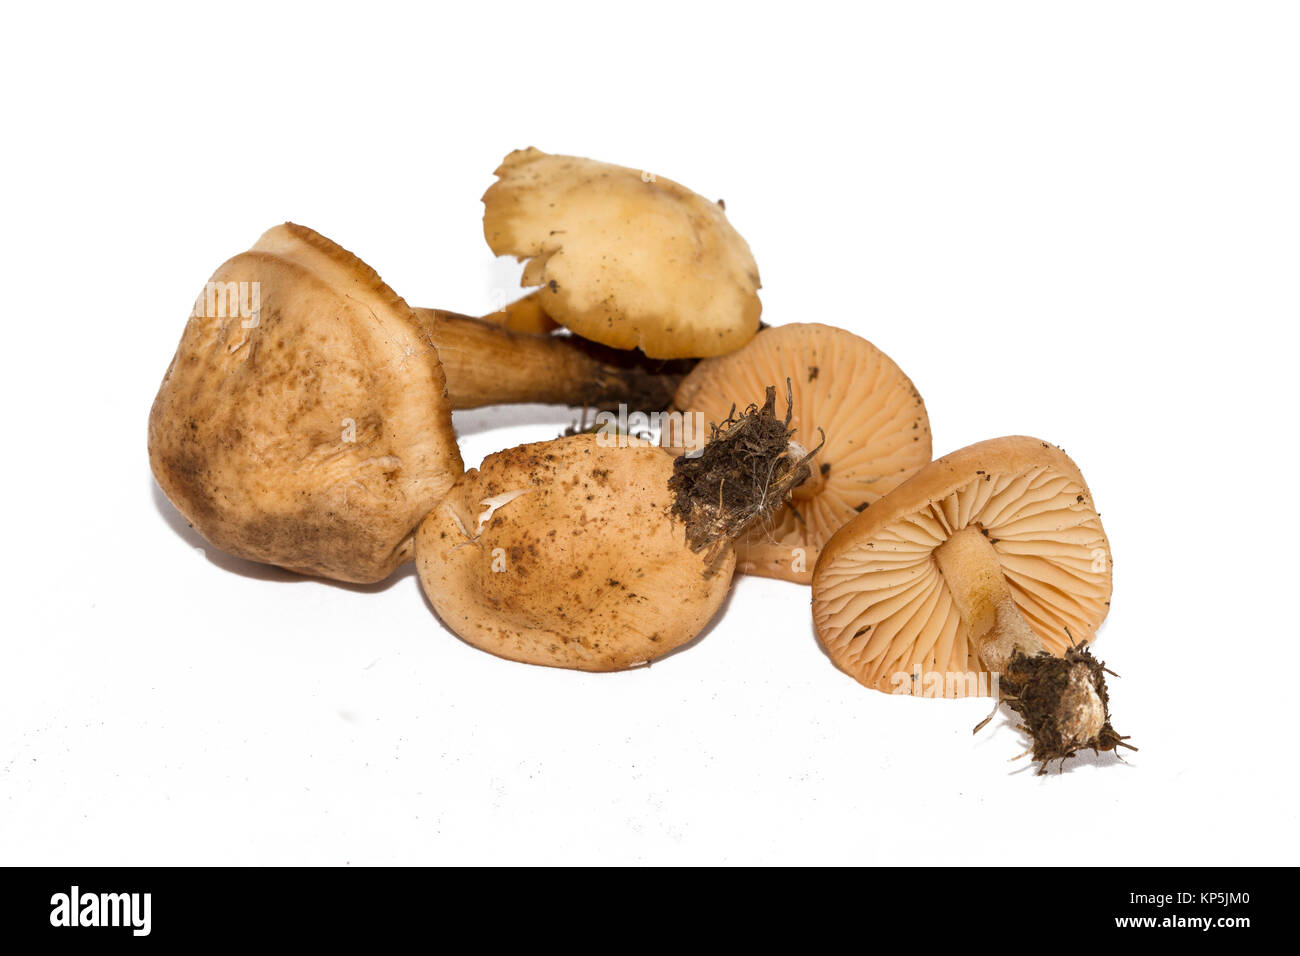 Marasmius oreades, the Scotch bonnet, is also known as the fairy ring mushroom or fairy ring champignon. Edible mushroom isolated on white background. Stock Photo